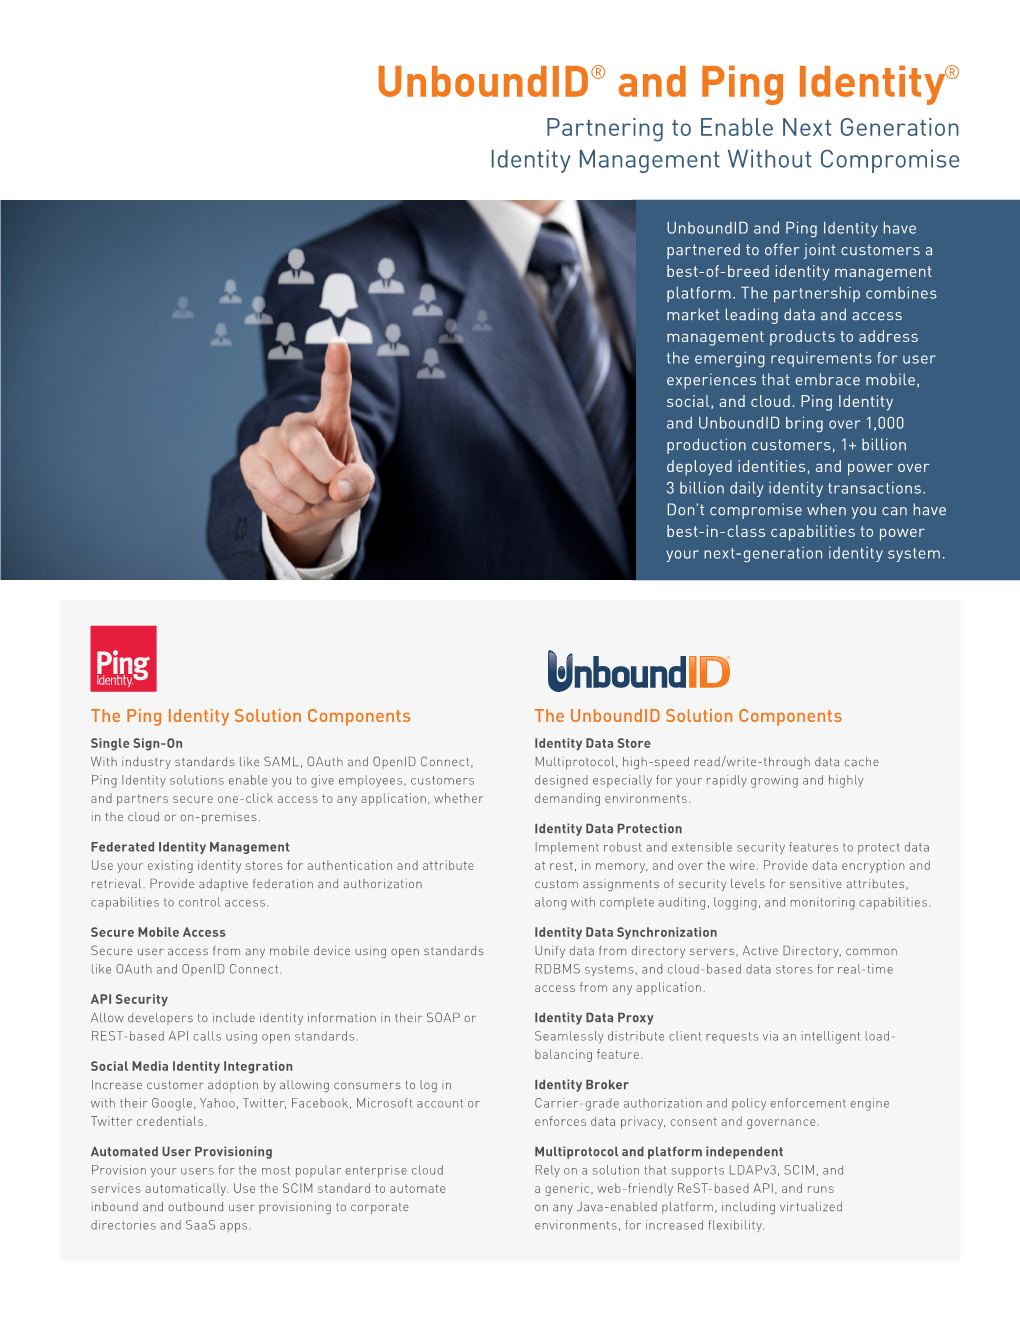 Unboundid® and Ping Identity® Partnering to Enable Next Generation Identity Management Without Compromise